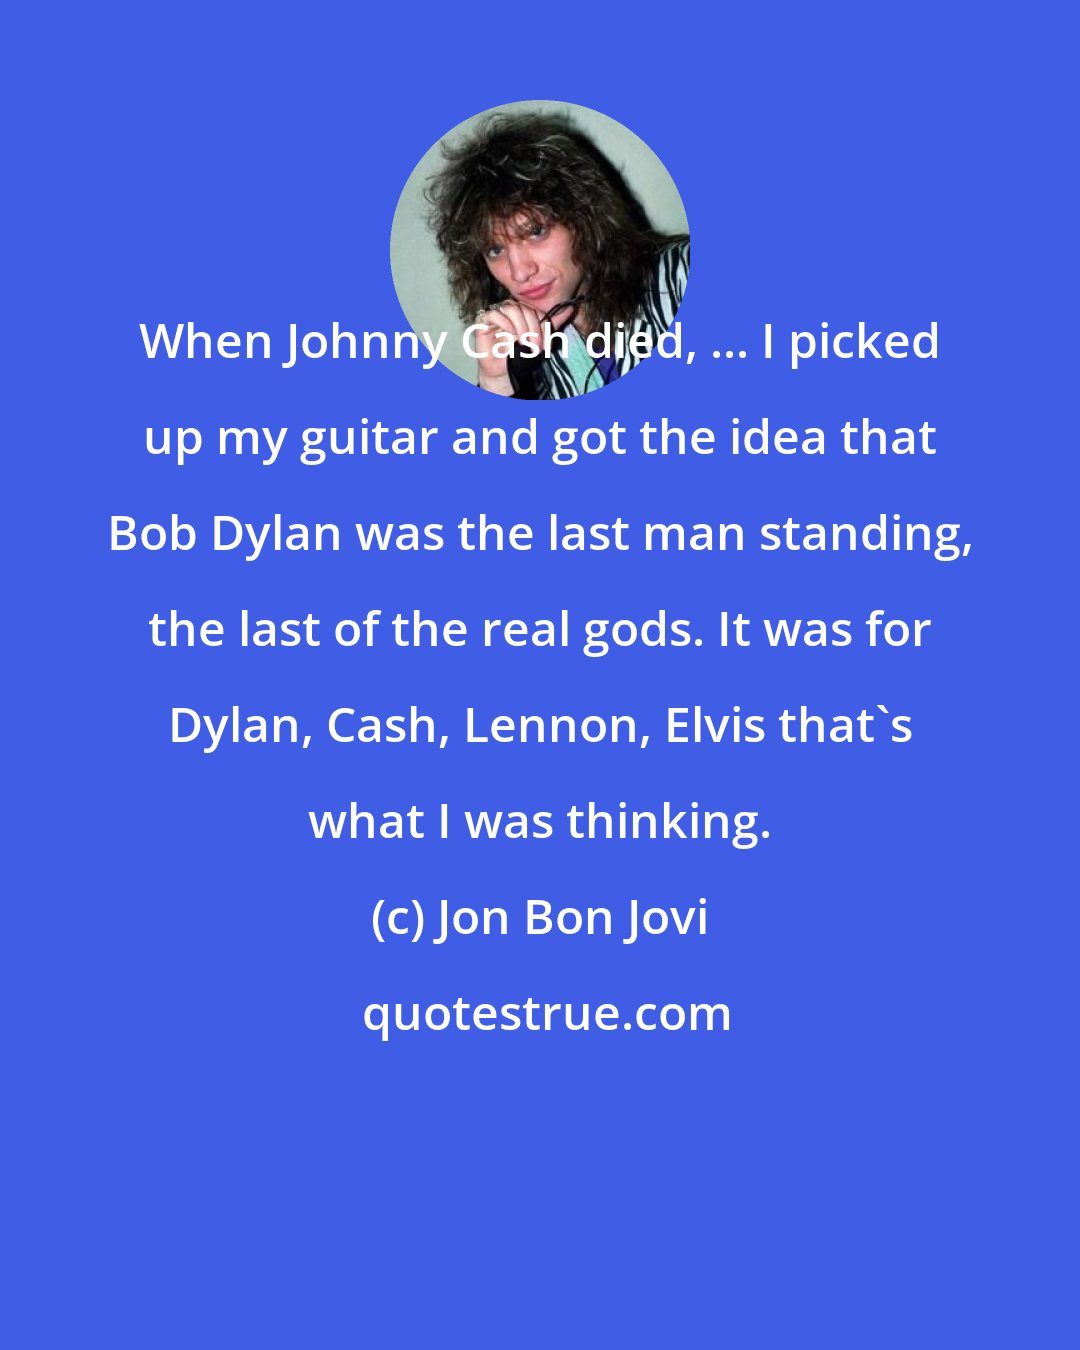 Jon Bon Jovi: When Johnny Cash died, ... I picked up my guitar and got the idea that Bob Dylan was the last man standing, the last of the real gods. It was for Dylan, Cash, Lennon, Elvis that's what I was thinking.